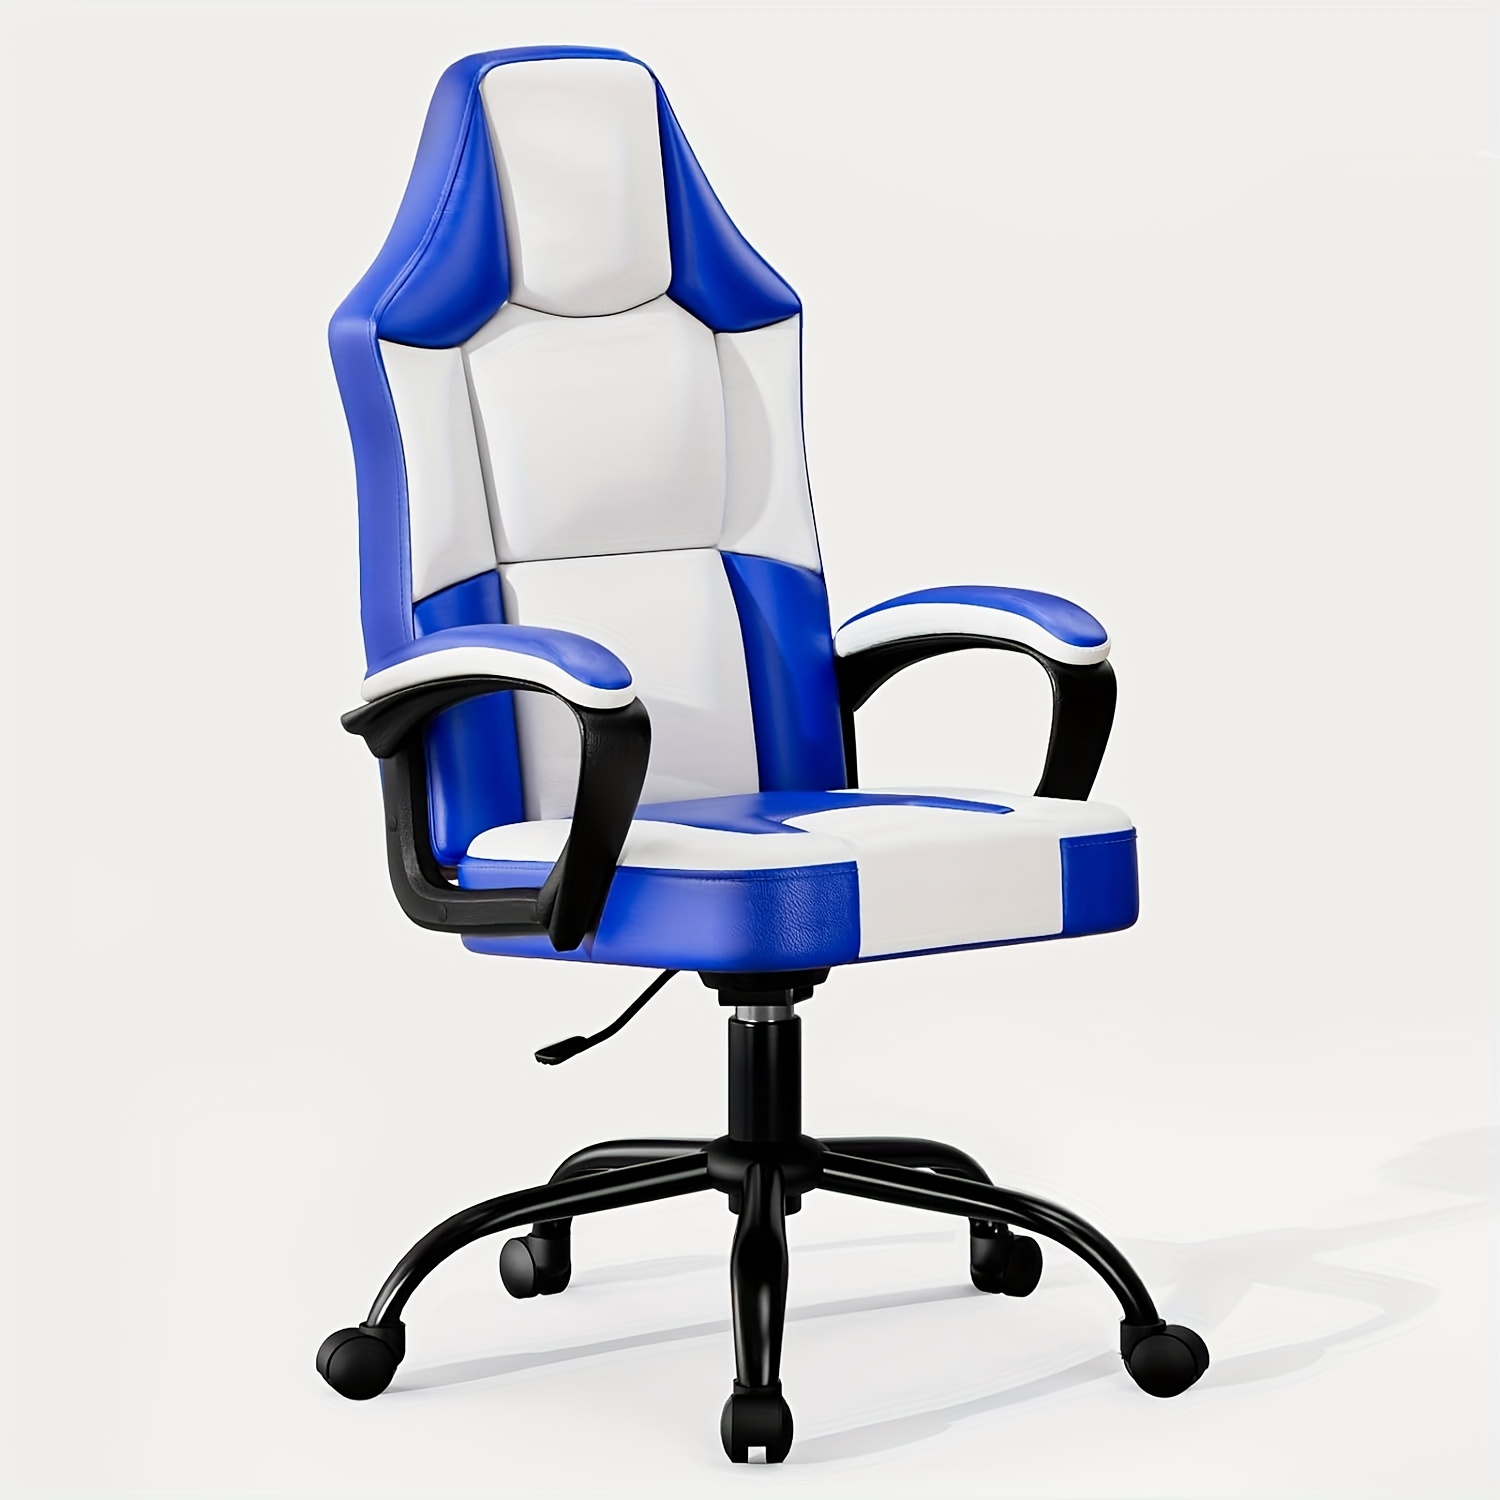 

Ergonomic Gaming Chair, Pu Leather For Adults, Reclining Gamer Chair Office Chair, Comfortable Computer Chair For Heavy People, Blue And White